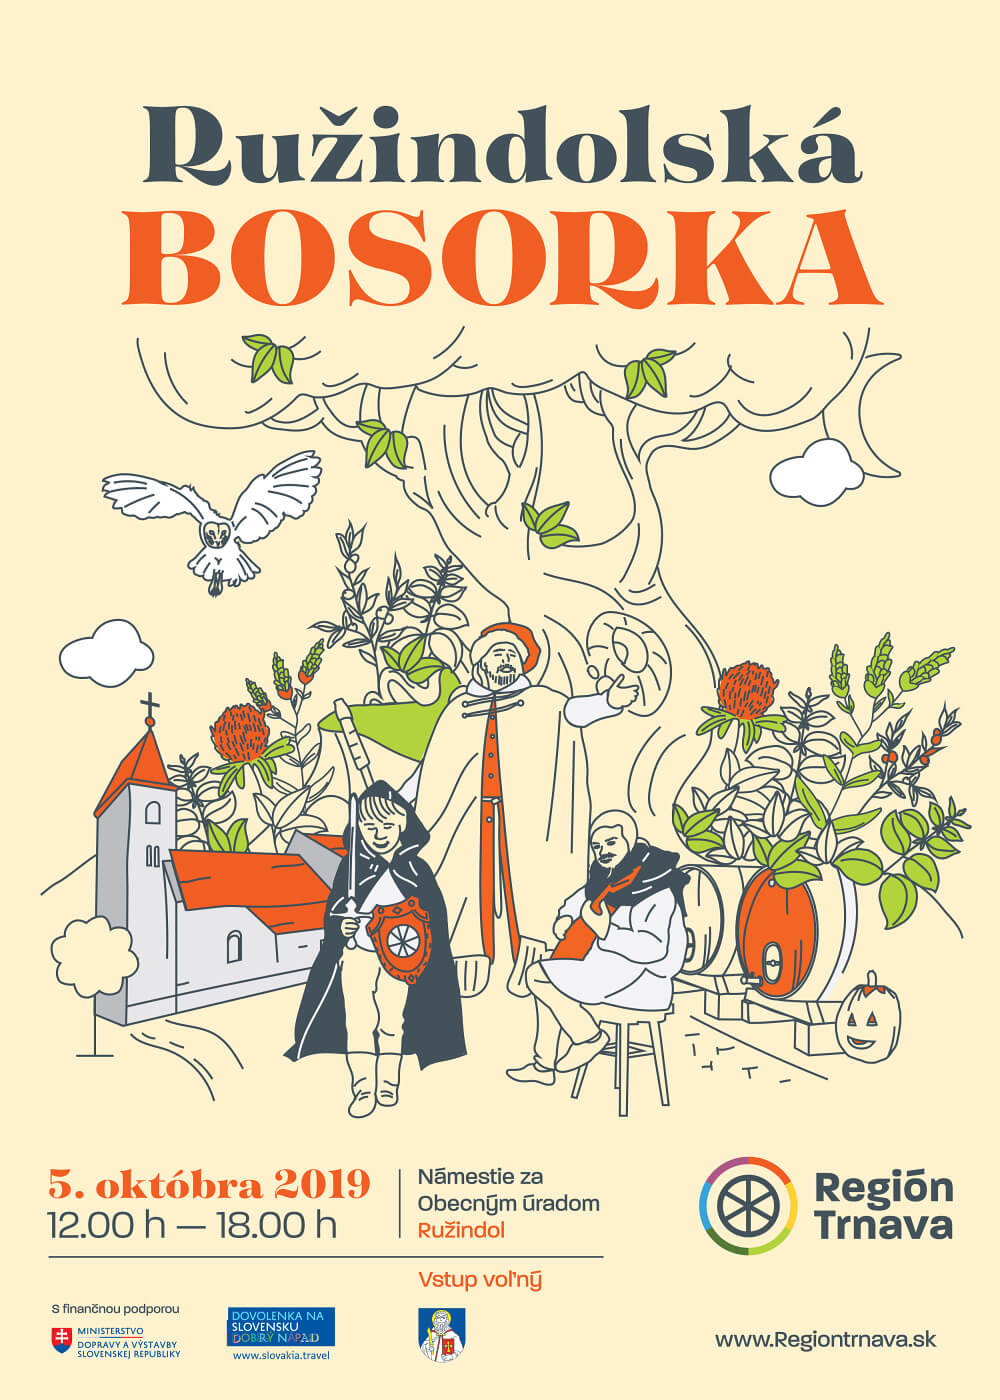 Bosorka download the new version for ios